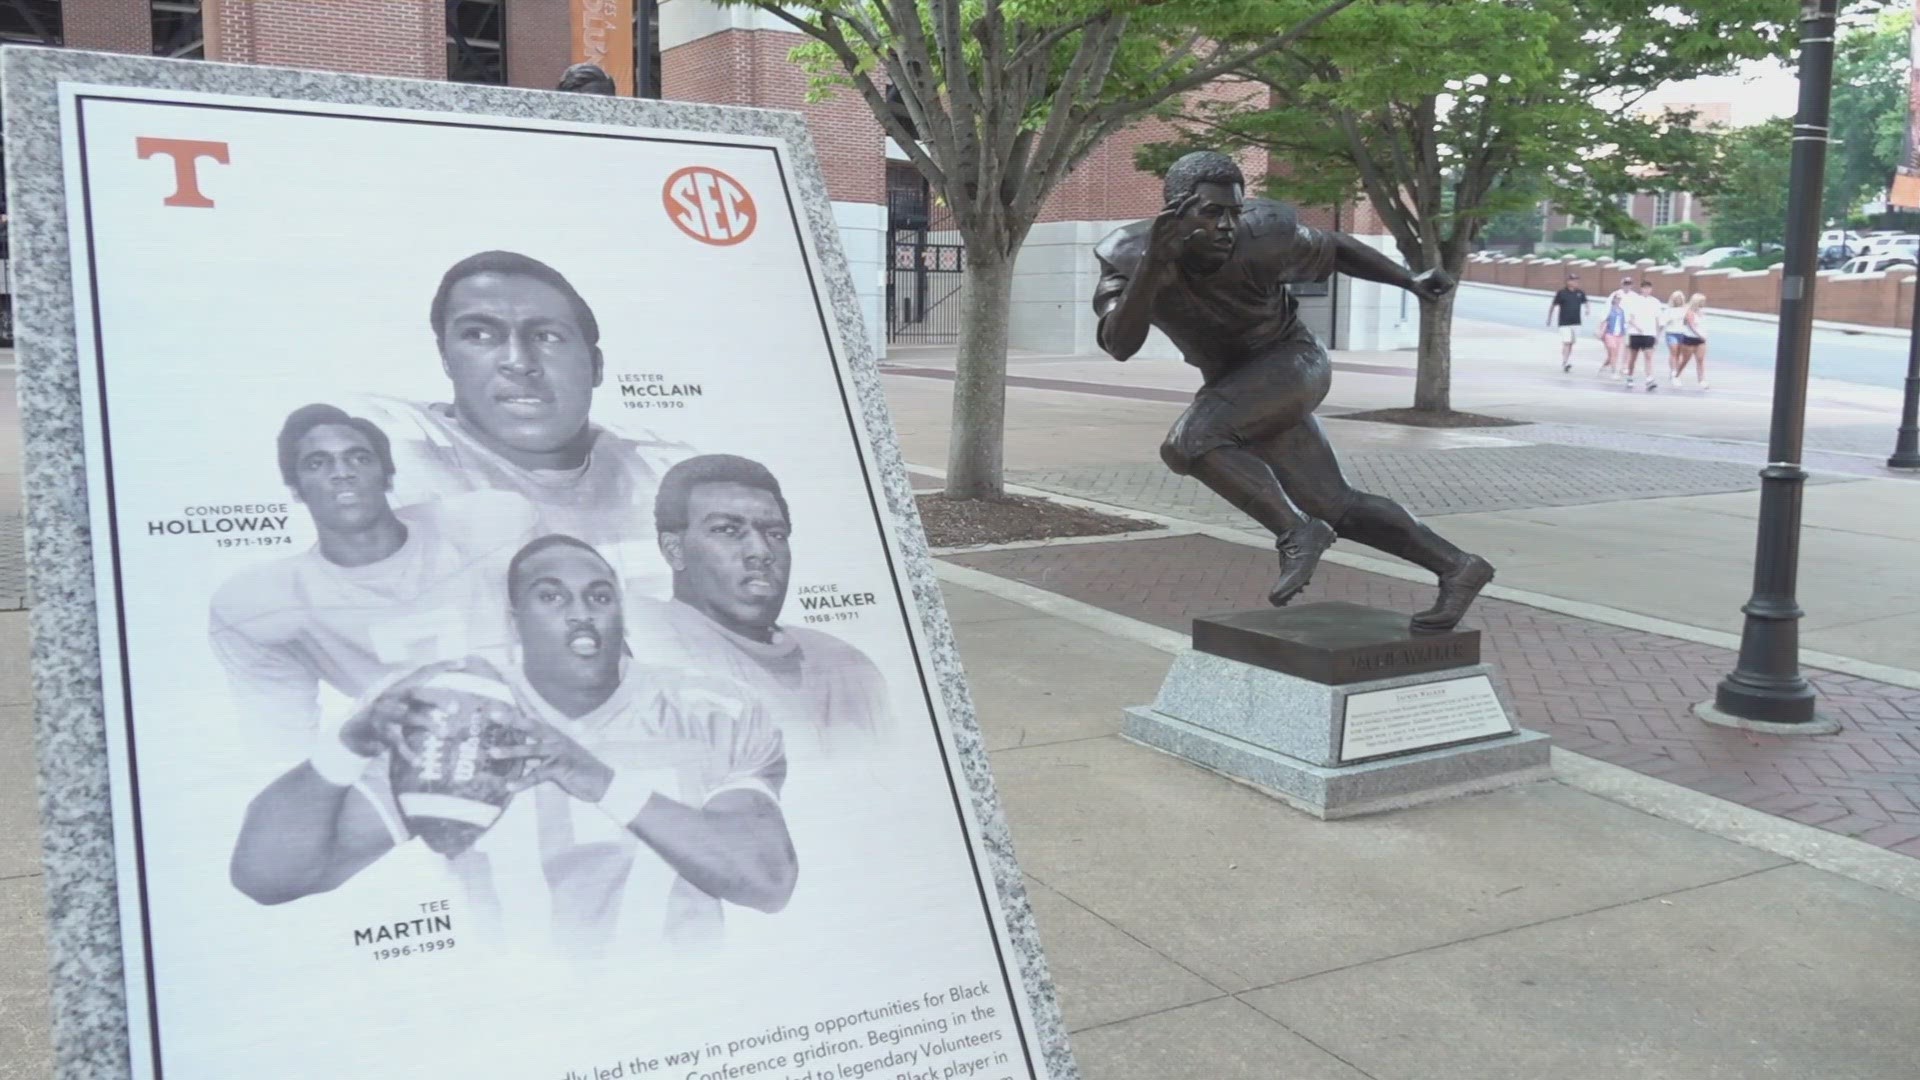 Fulton High School and UT graduate Jackie Walker paved the way for future generations with his on-field prowess and tremendous courage.